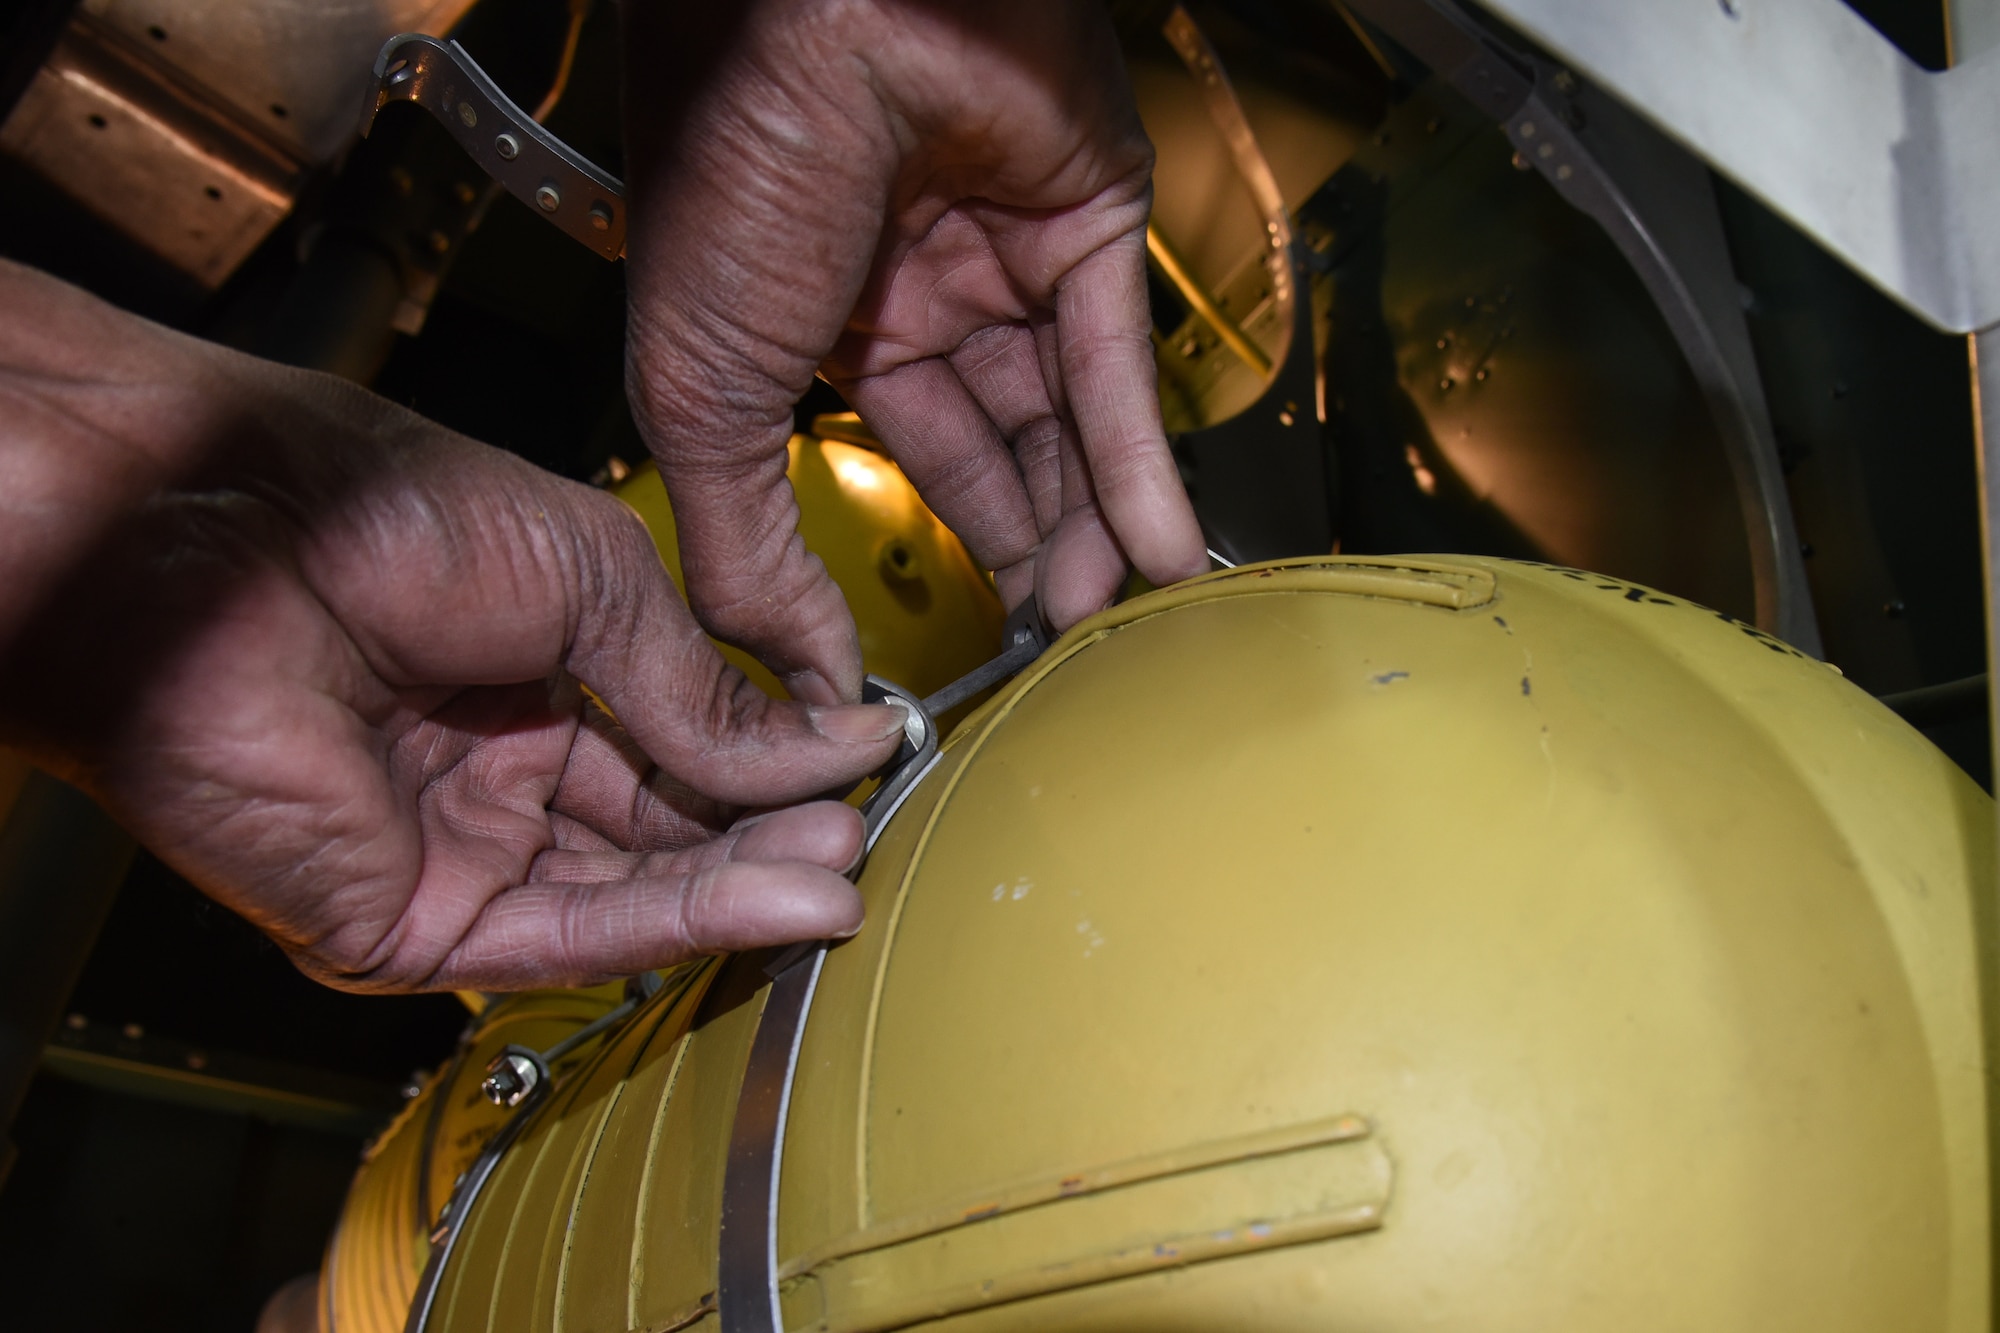 (03/09/2018) -- Museum restoration specialist Dave Robb works on an oxygen tank in the Boeing B-17F Memphis Belle. Plans call for the aircraft to be placed on permanent public display in the WWII Gallery here at the National Museum of the U.S. Air Force on May 17, 2018. (U.S. Air Force photo by Ken LaRock)